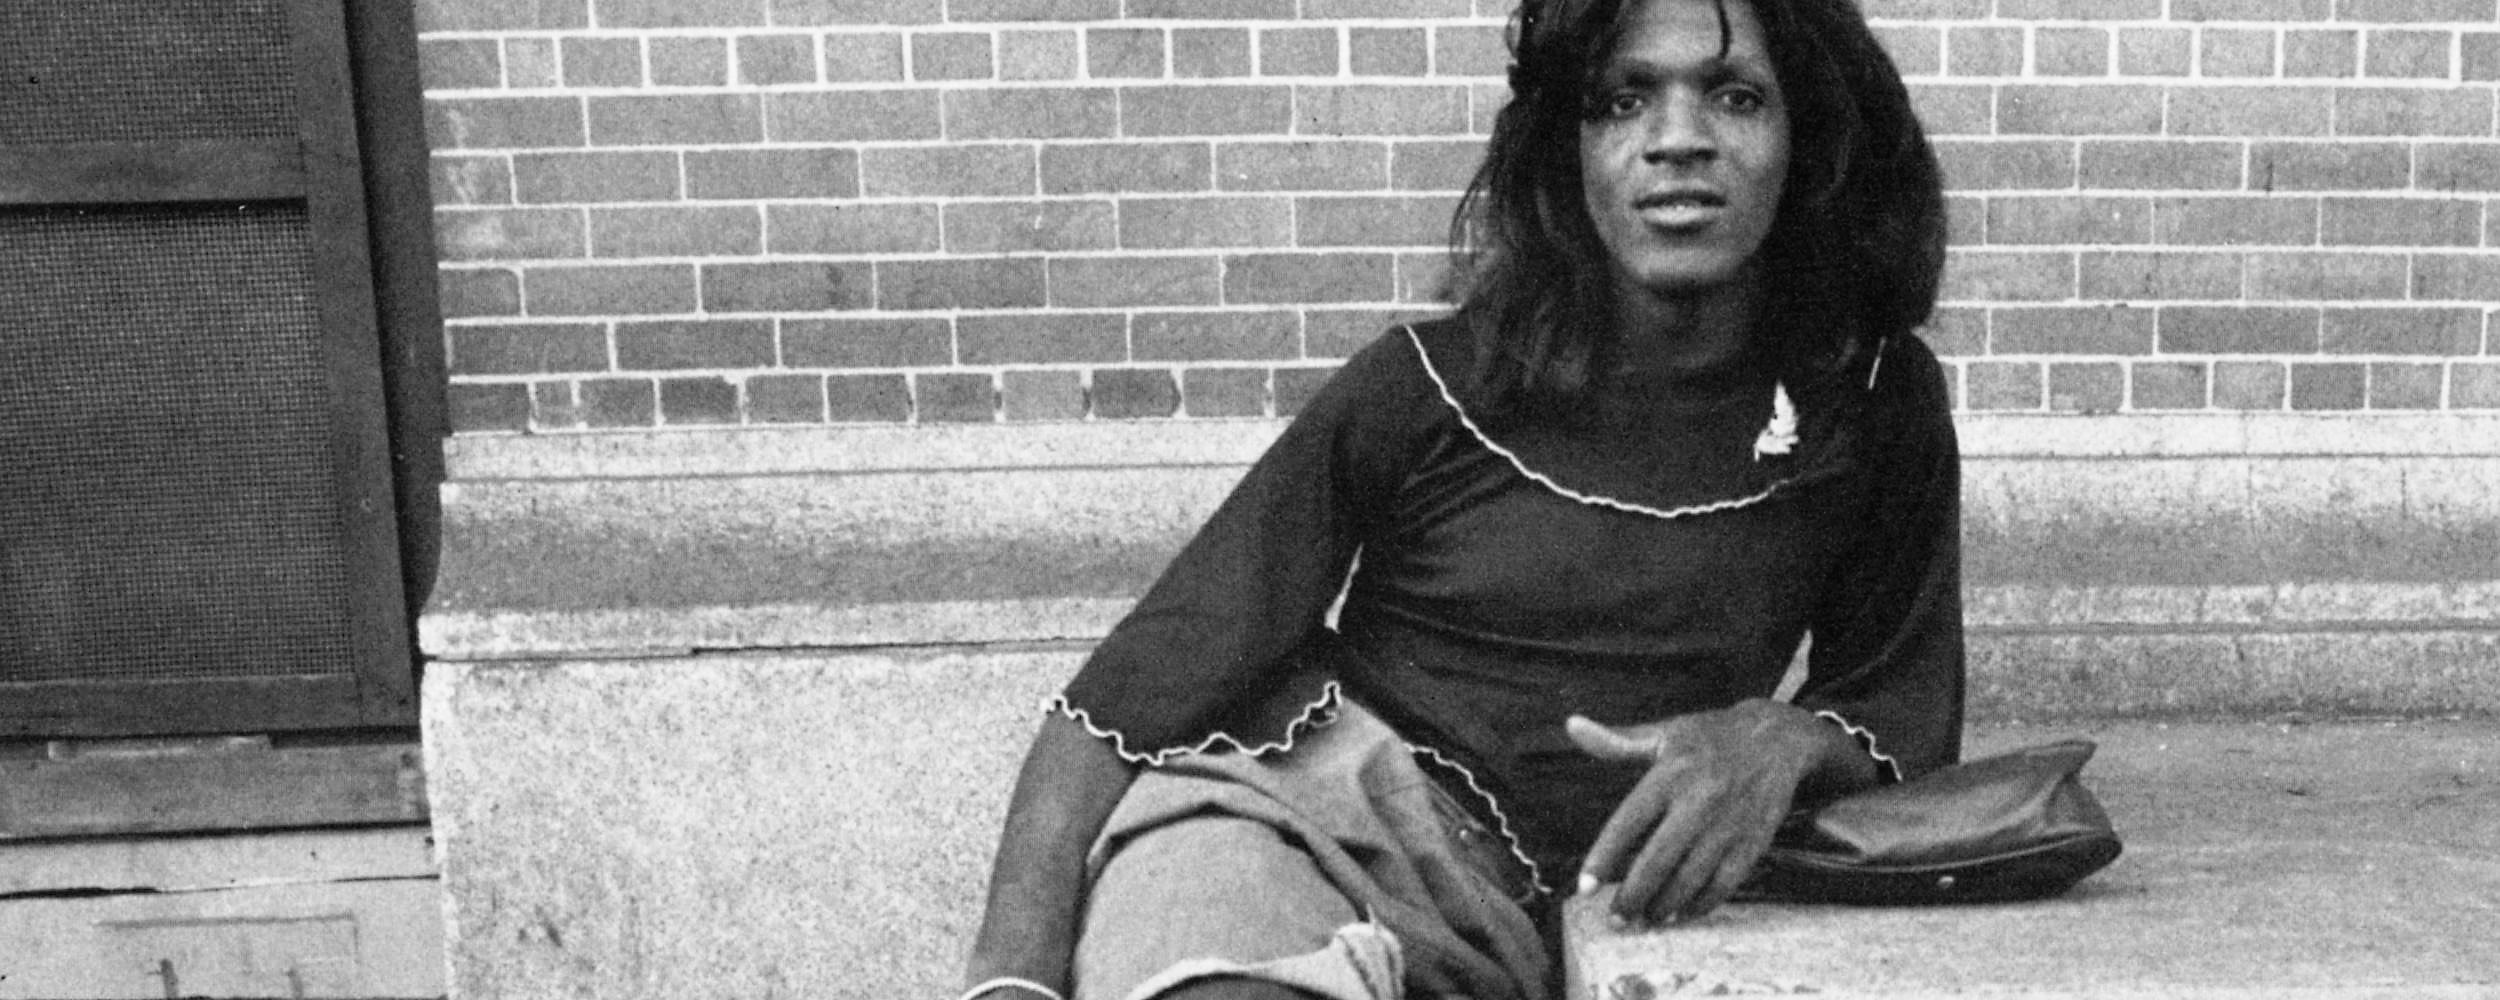 Review: ‘The Death and Life of Marsha P. Johnson’ is Trans Film Noir